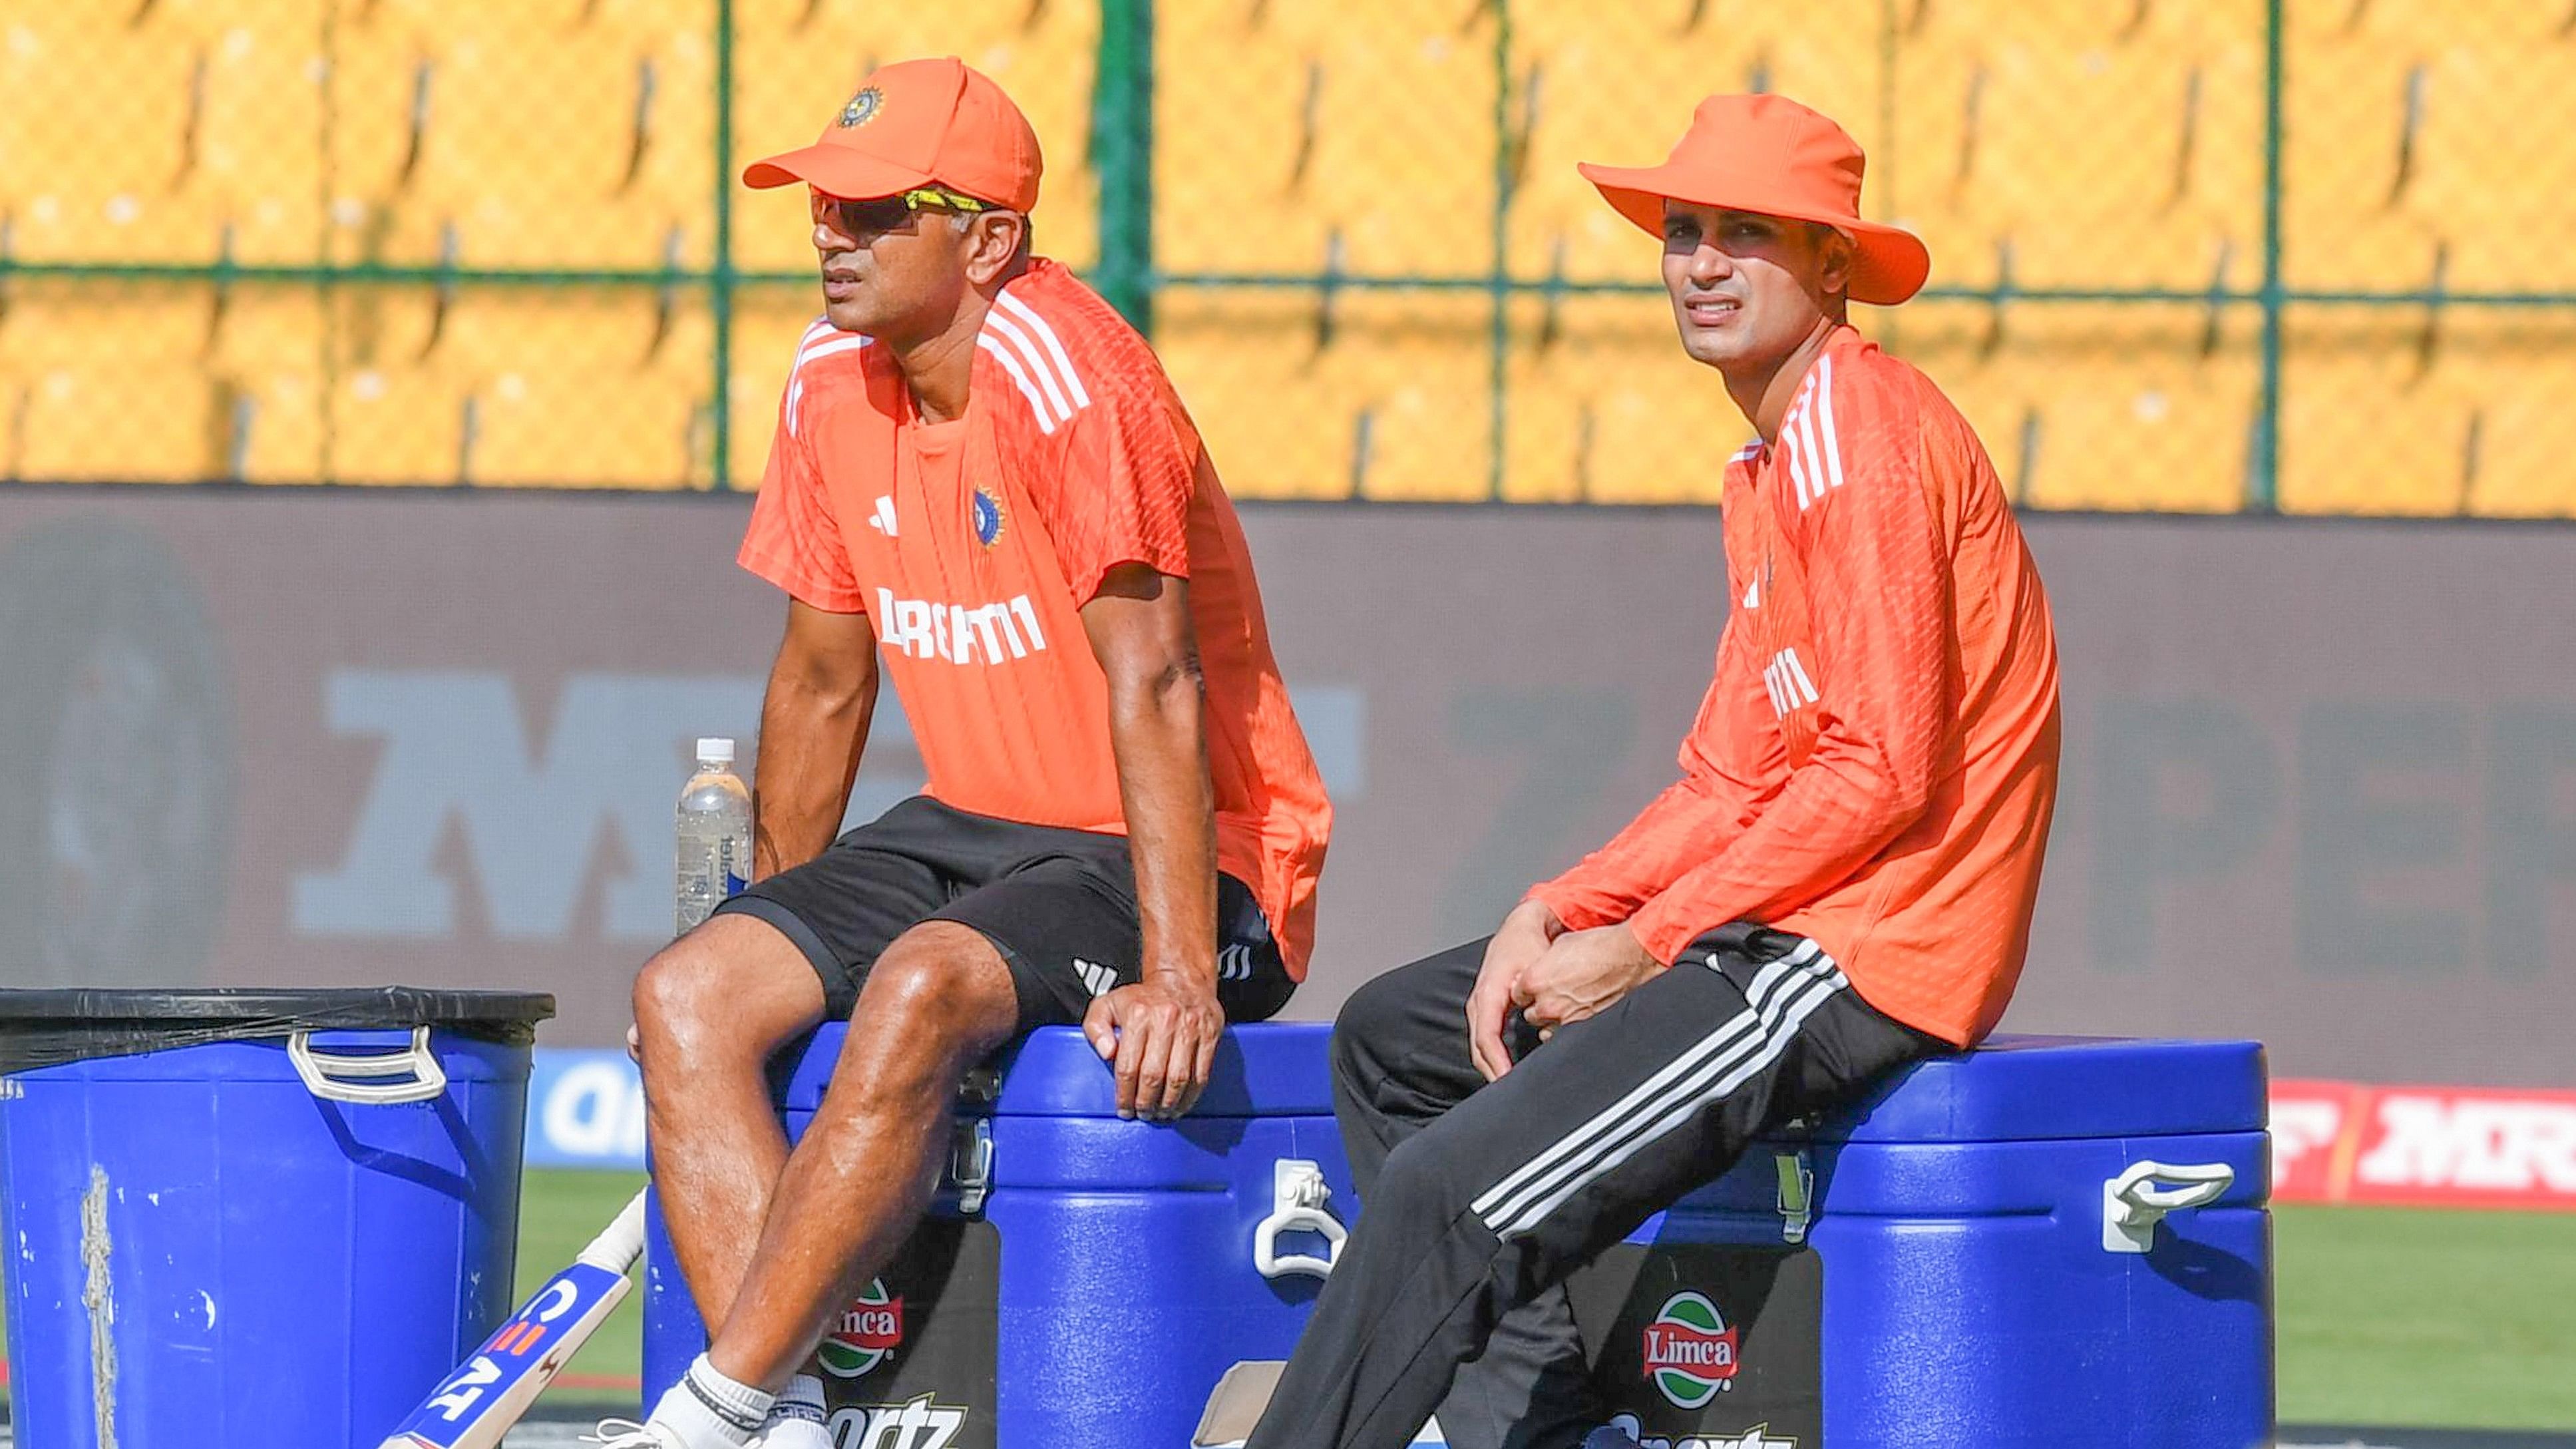 <div class="paragraphs"><p>Head coach Rahul Dravid Coach and opener Shubman Gill take a short break from practice proceedings at the M Chinnaswamy Stadium in Bengaluru on Saturday. </p></div>